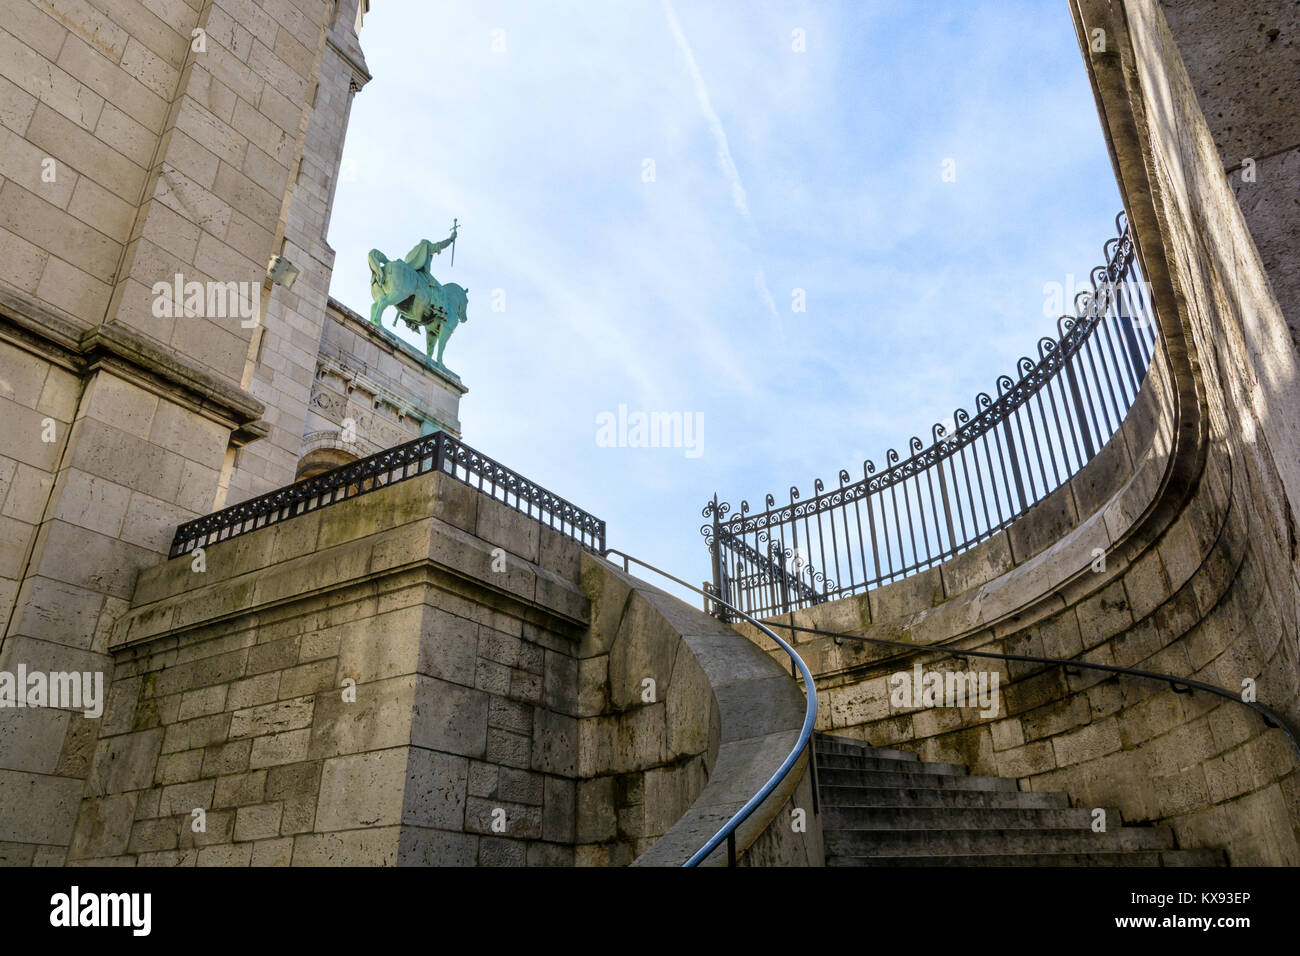 Low angle view of the equestrian statue of King Saint-Louis overhanging the portico of the Basilica of the Sacred Heart of Paris with a solid stone st Stock Photo